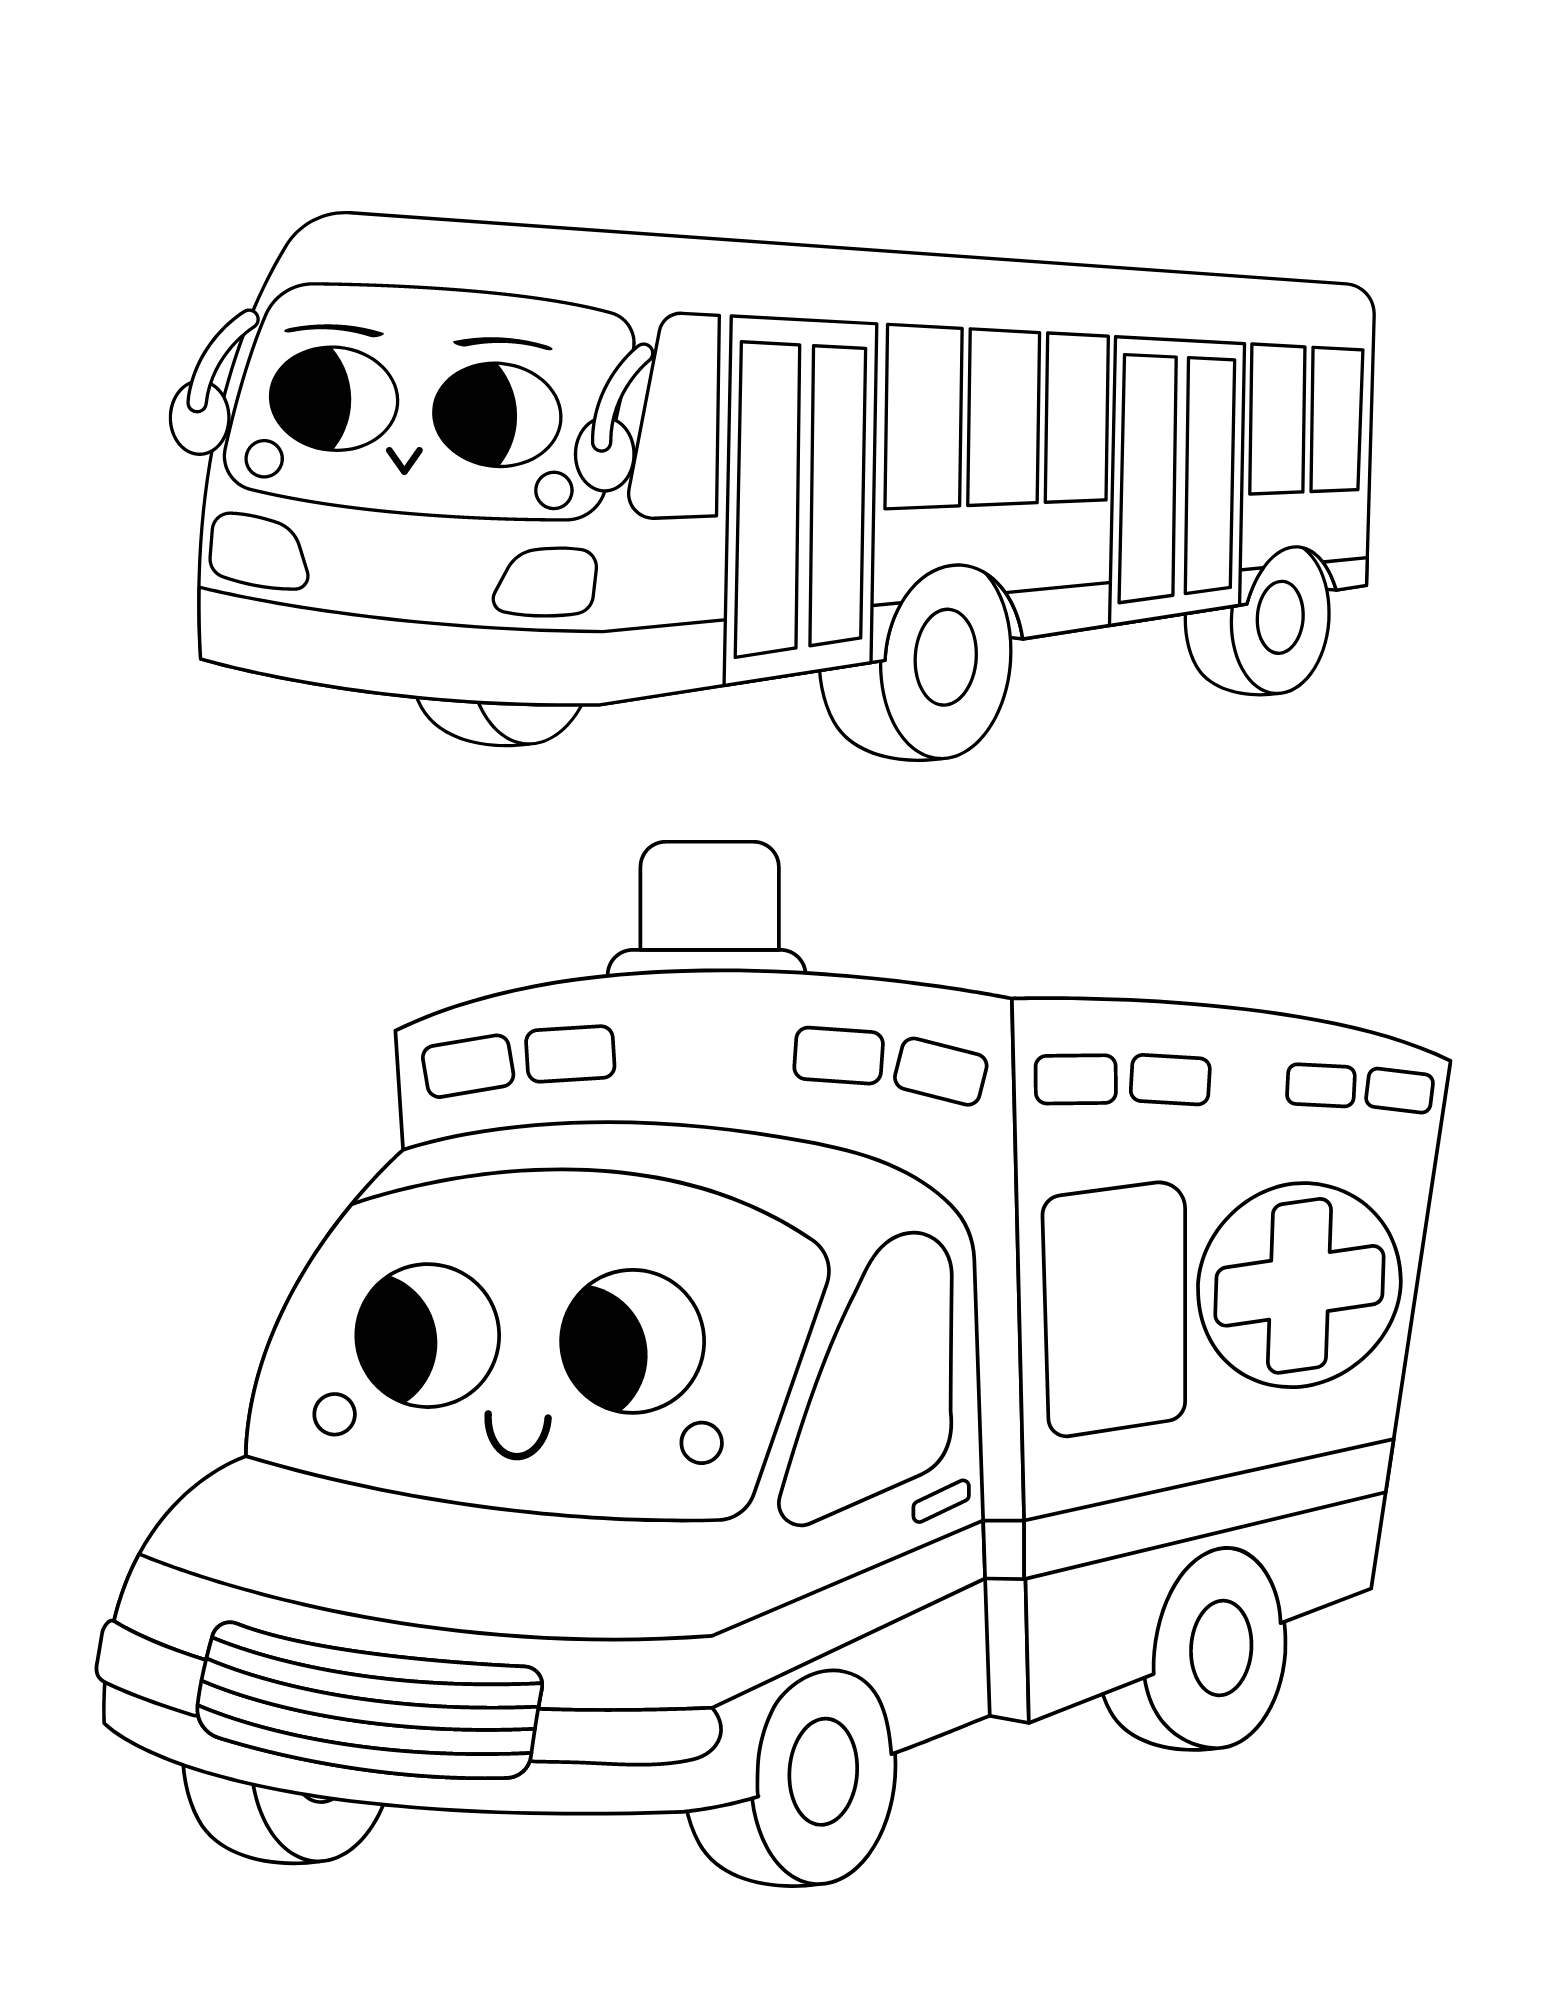 Free cute transportation coloring pages for kids